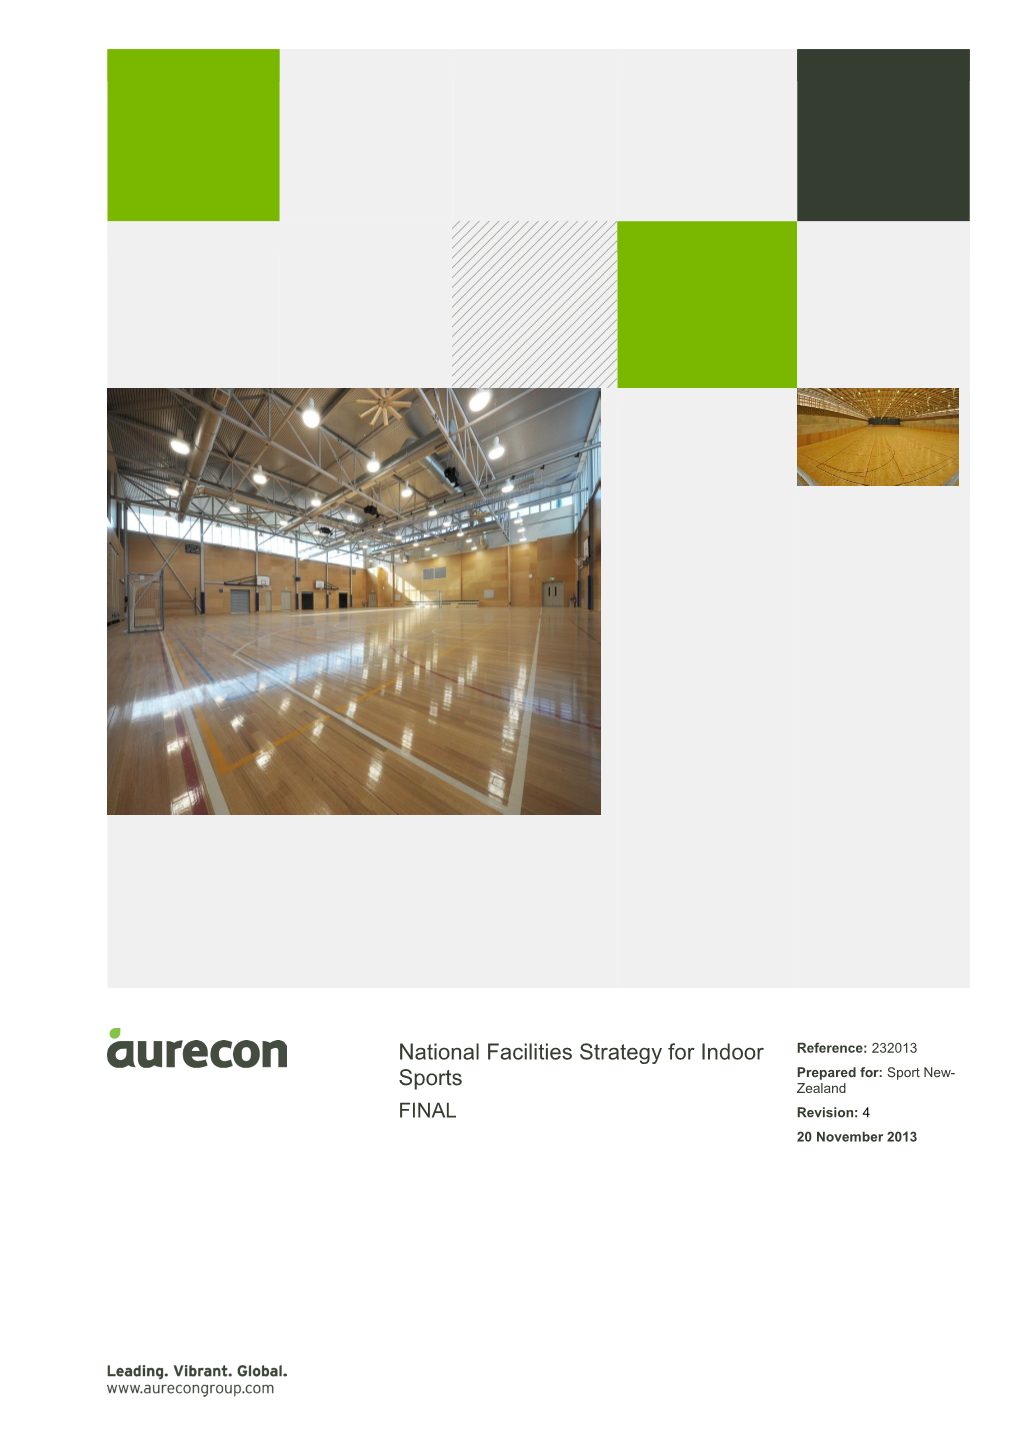 National Indoor Sports Facilities Strategy